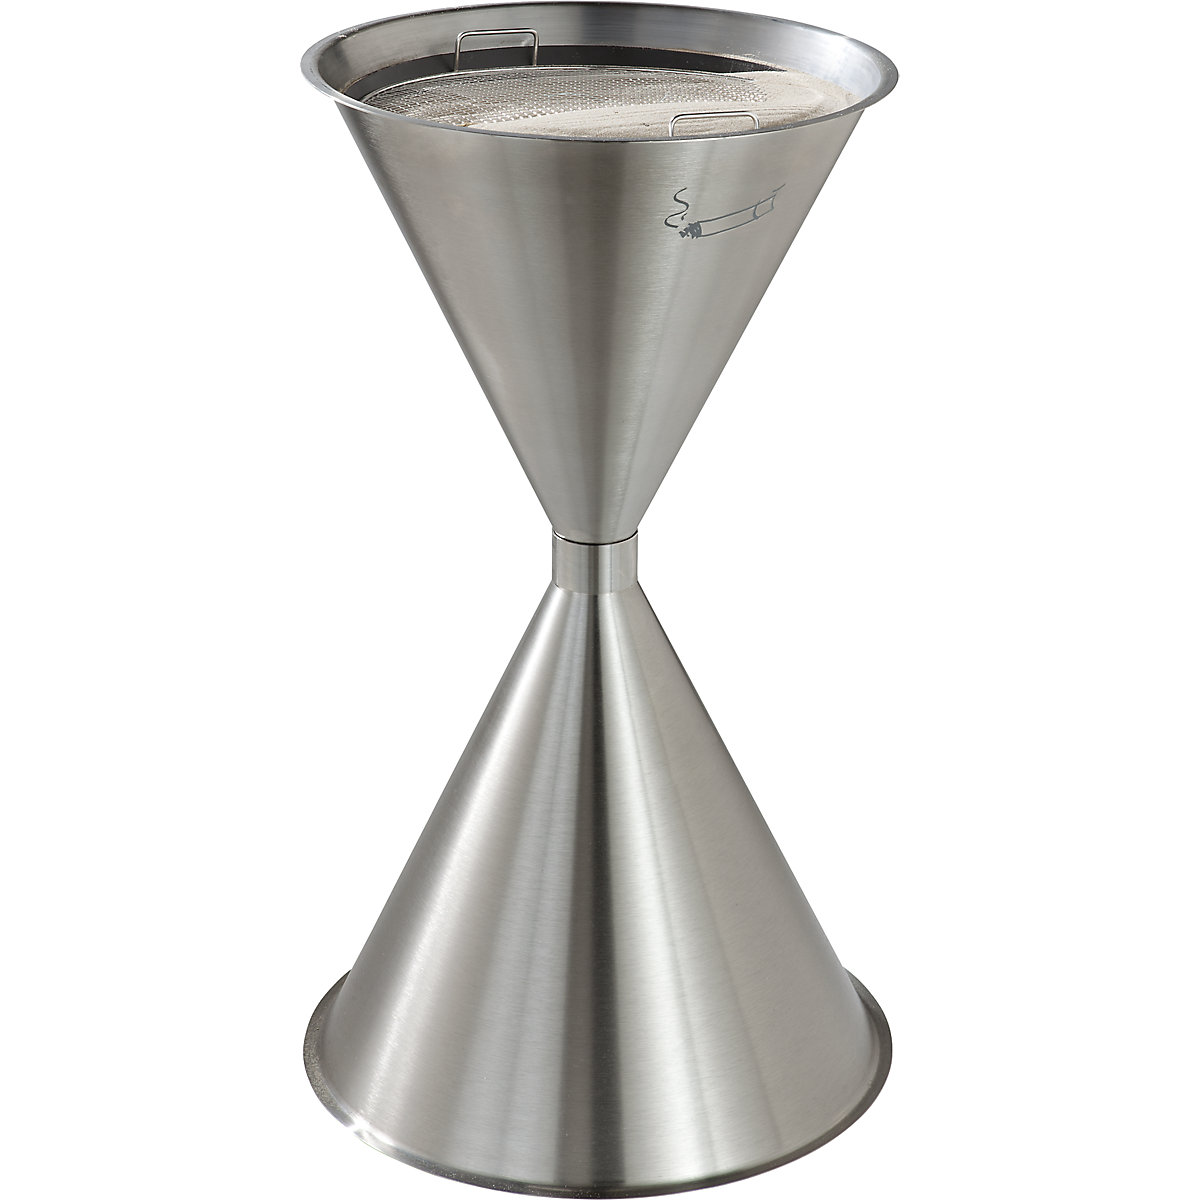 Conical ashtray made of metal - VAR